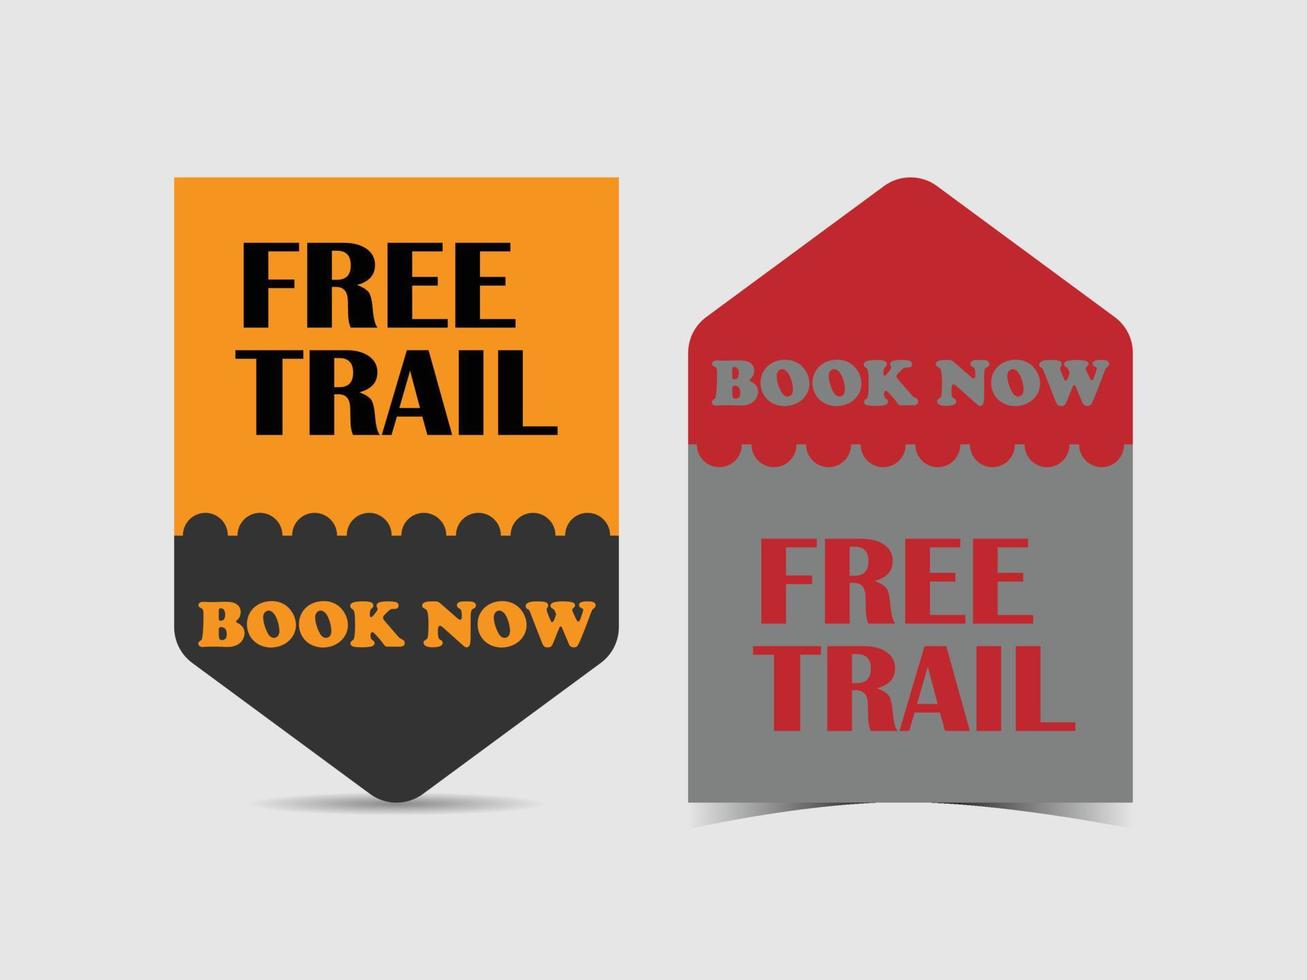 Free trail badges. Business products free trail offer, book now sticker, tag design illustration. vector